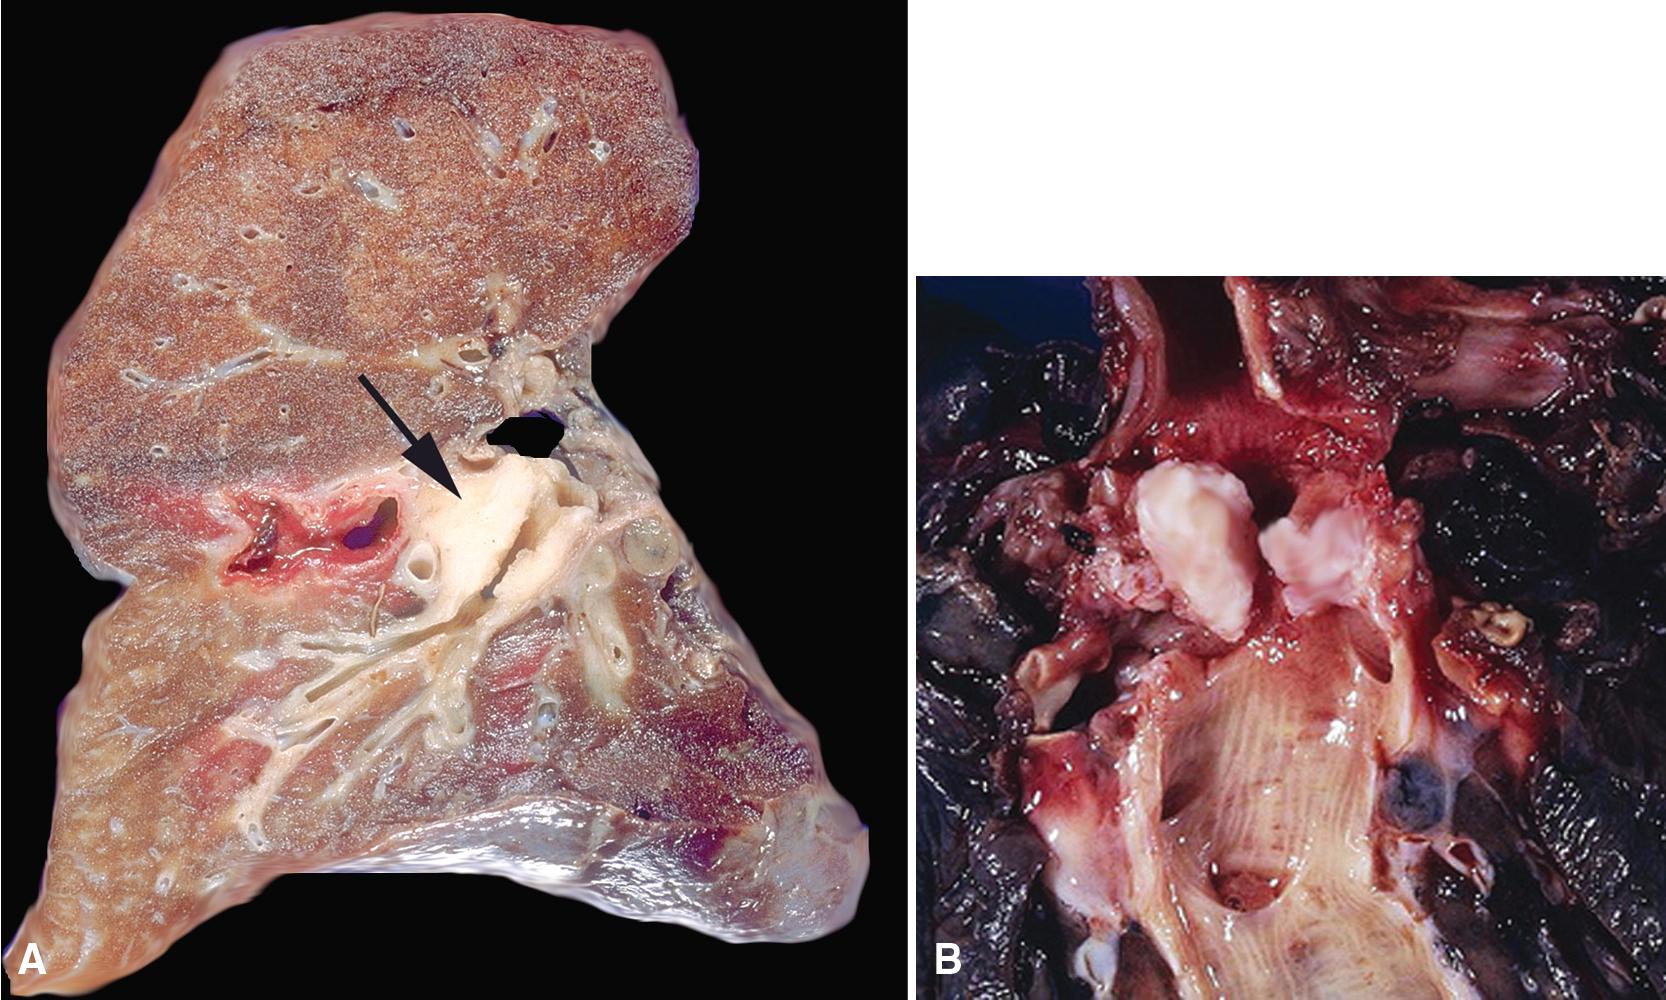 Figure 20.38, (A and B) The homogeneous white-gray cut surface of an endobronchial granular cell tumor (arrow) is seen in these gross photographs.